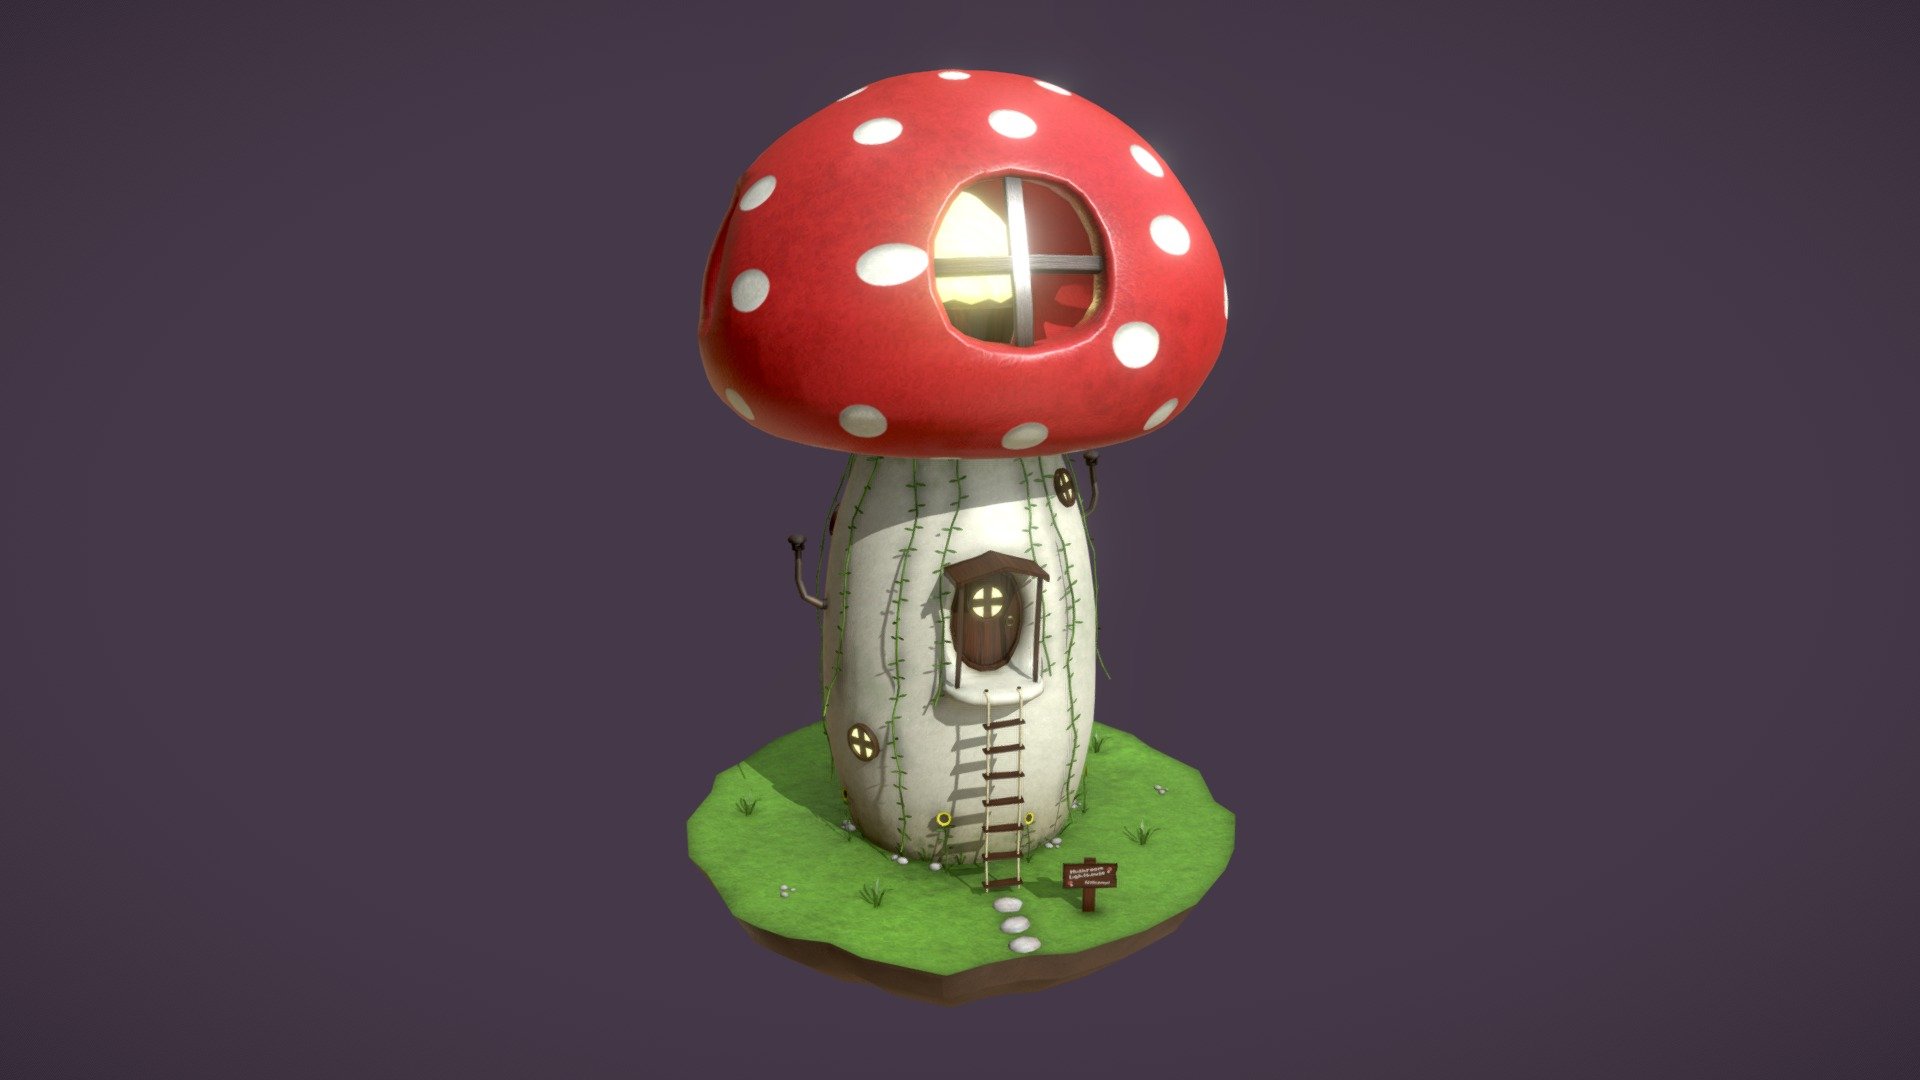 🍄 My stylised Mushroom Lighthouse 3D model for my first ever #SketchfabWeeklyChallenge! I was inspired by fairy tales, cartoons and such. I wanted to make something really different and unique around the theme and I'm pretty happy with how this turned out. Modelled in Maya. Textures hand-painted in Photoshop. 🍄

UE5 video flythrough: https://youtu.be/dX9CL6nAwUc
UE5 render pics: https://www.artstation.com/artwork/3qB5J2 

More of my work: https://www.artstation.com/theoclarke 
My portfolio: https://theoclarkeart.weebly.com/ - Mushroom Lighthouse 🍄 #SketchfabWeeklyChallenge - 3D model by TheoClarke 3d model